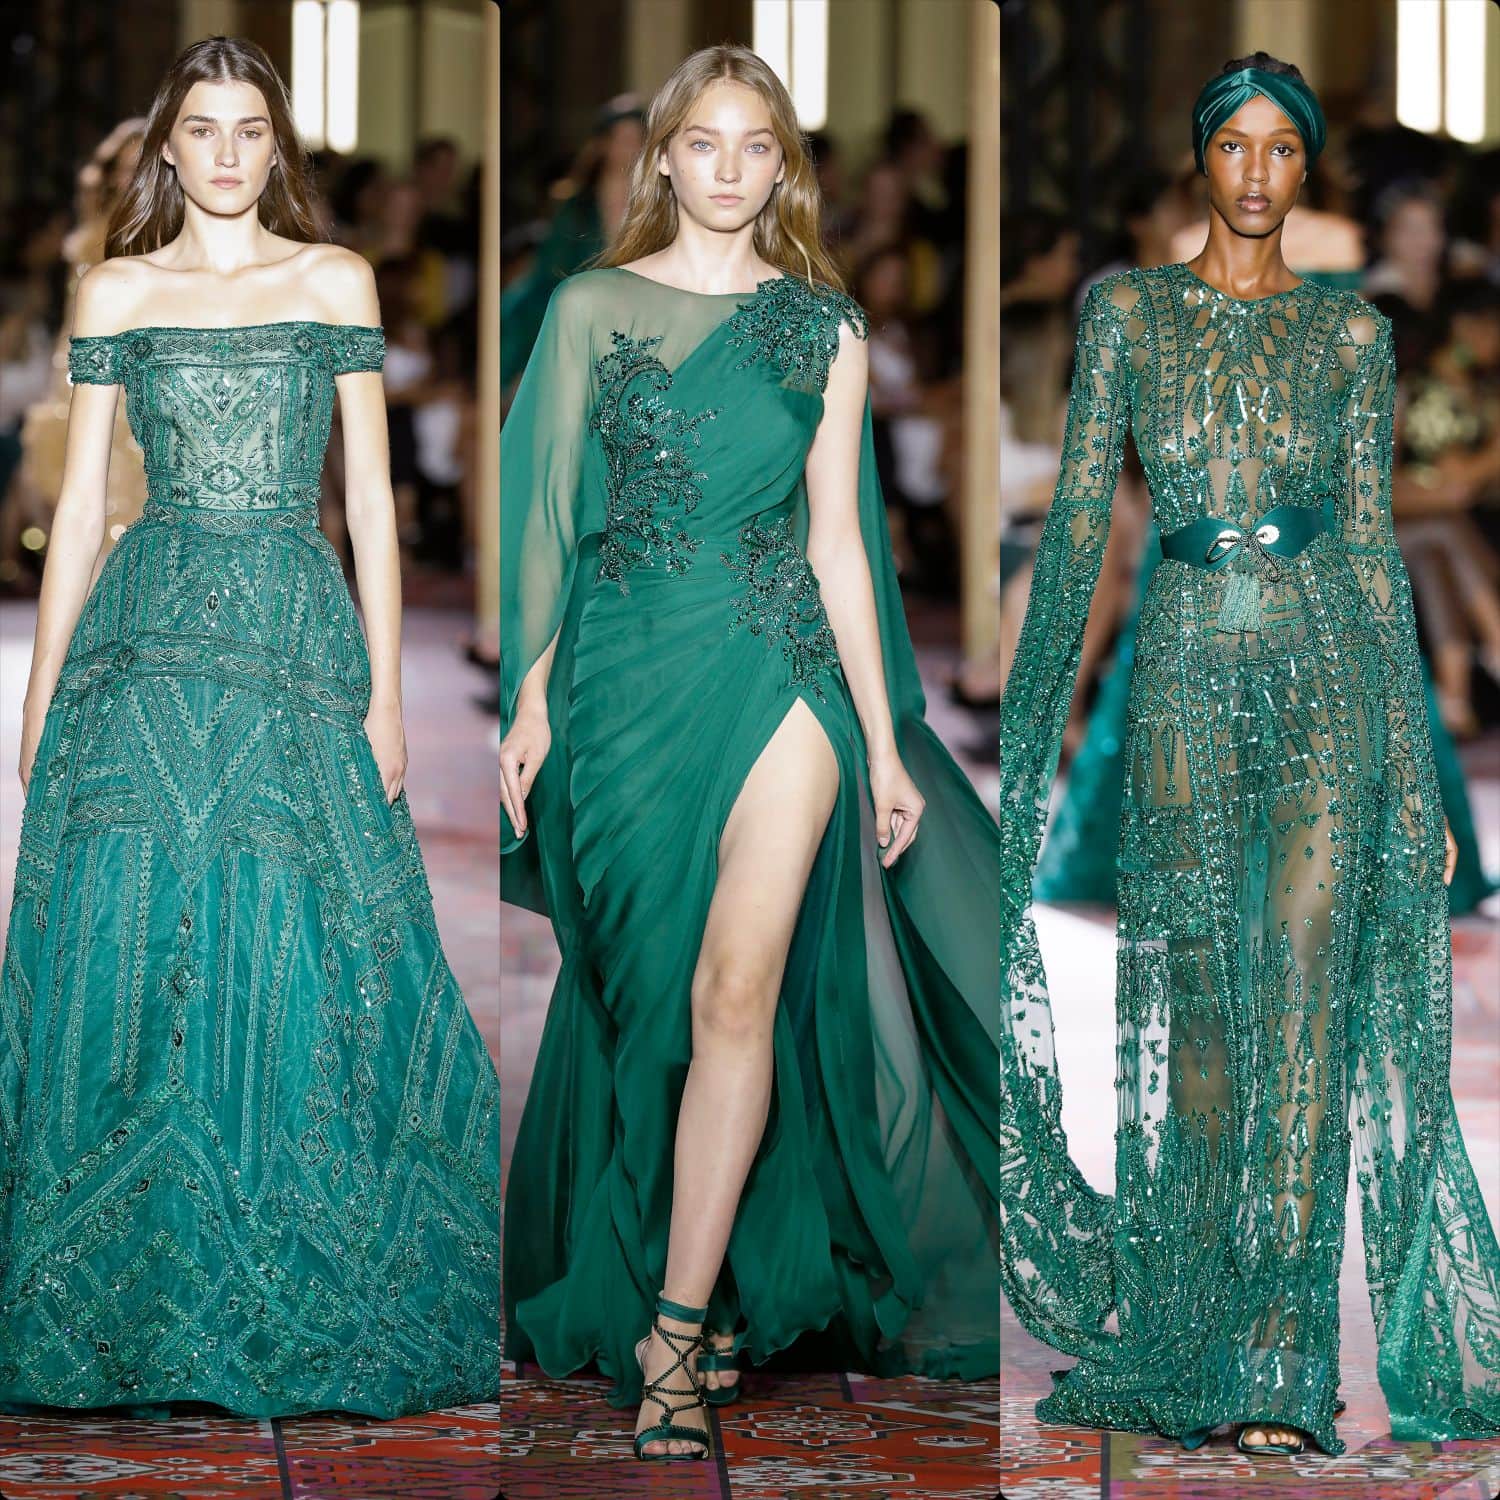 Fall 2019 Haute Couture: Zuhair Murad's Moroccan Travels